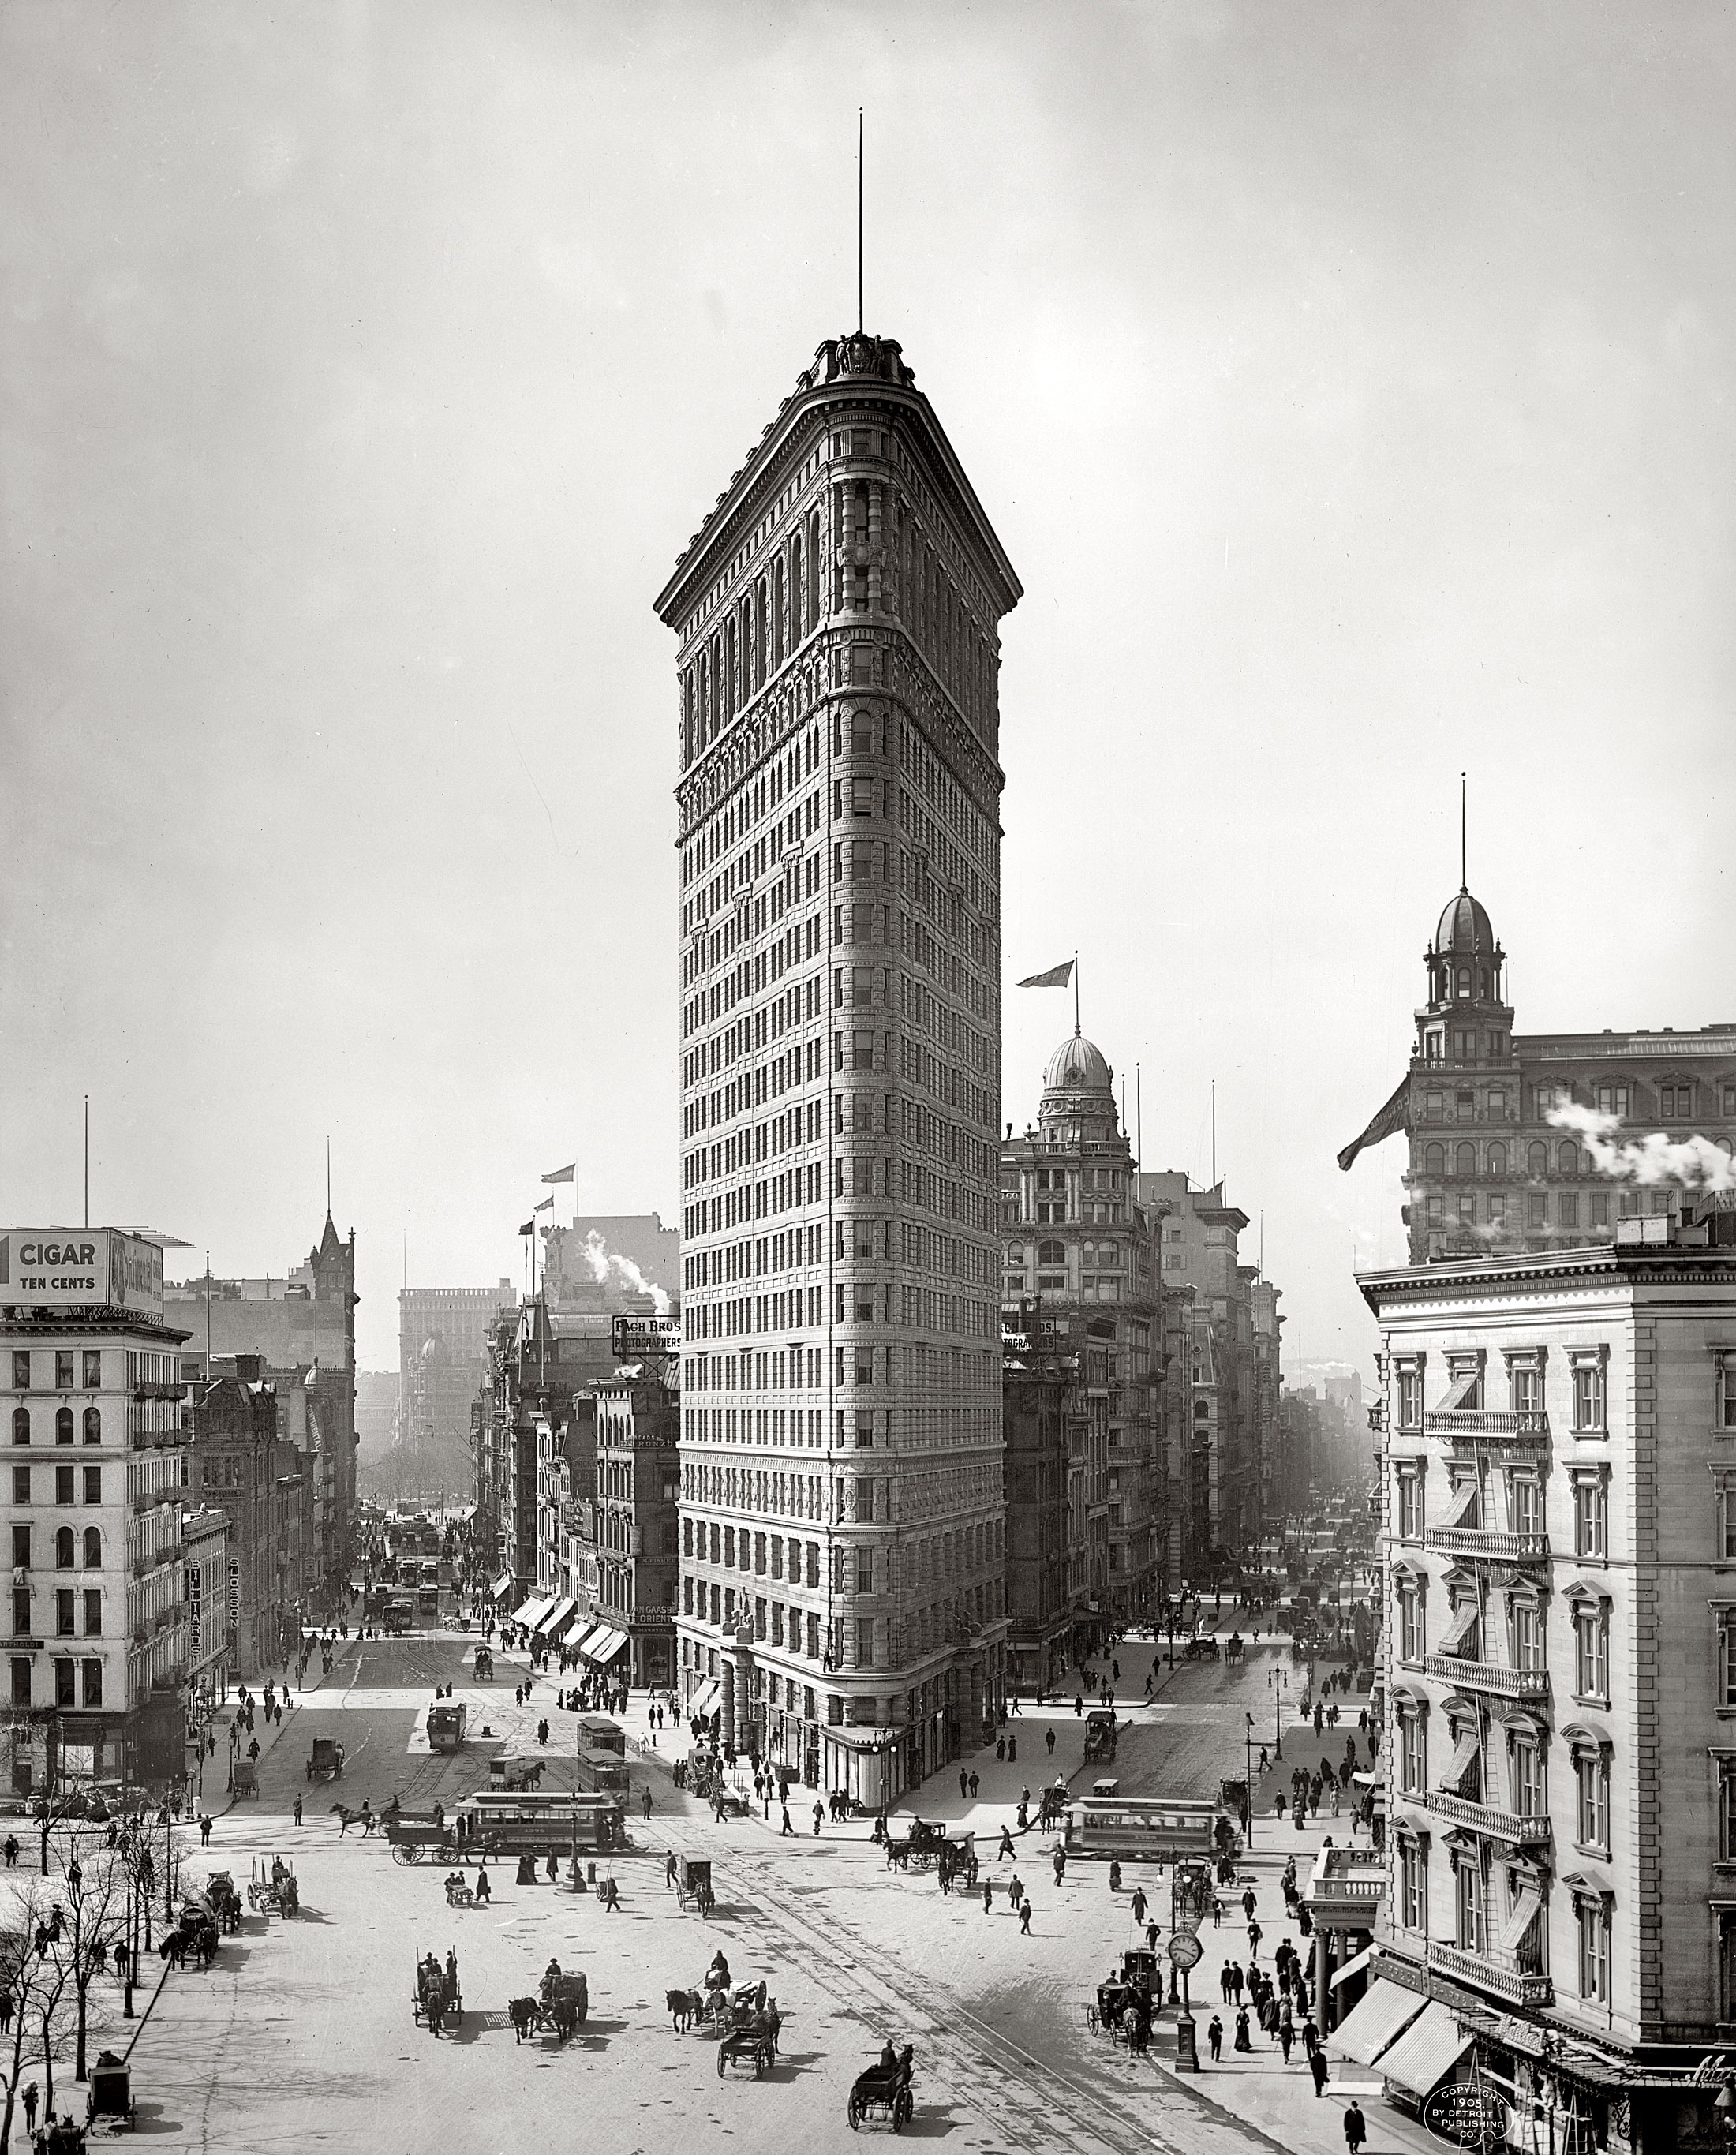 New York circa 1905. "Flatiron Building, Broadway and Fifth Avenue." Another view of everyone's favorite proto-skyscraper, at anchor in Manhattan. 8x10 inch dry plate glass negative, Detroit Publishing Company. View full size.